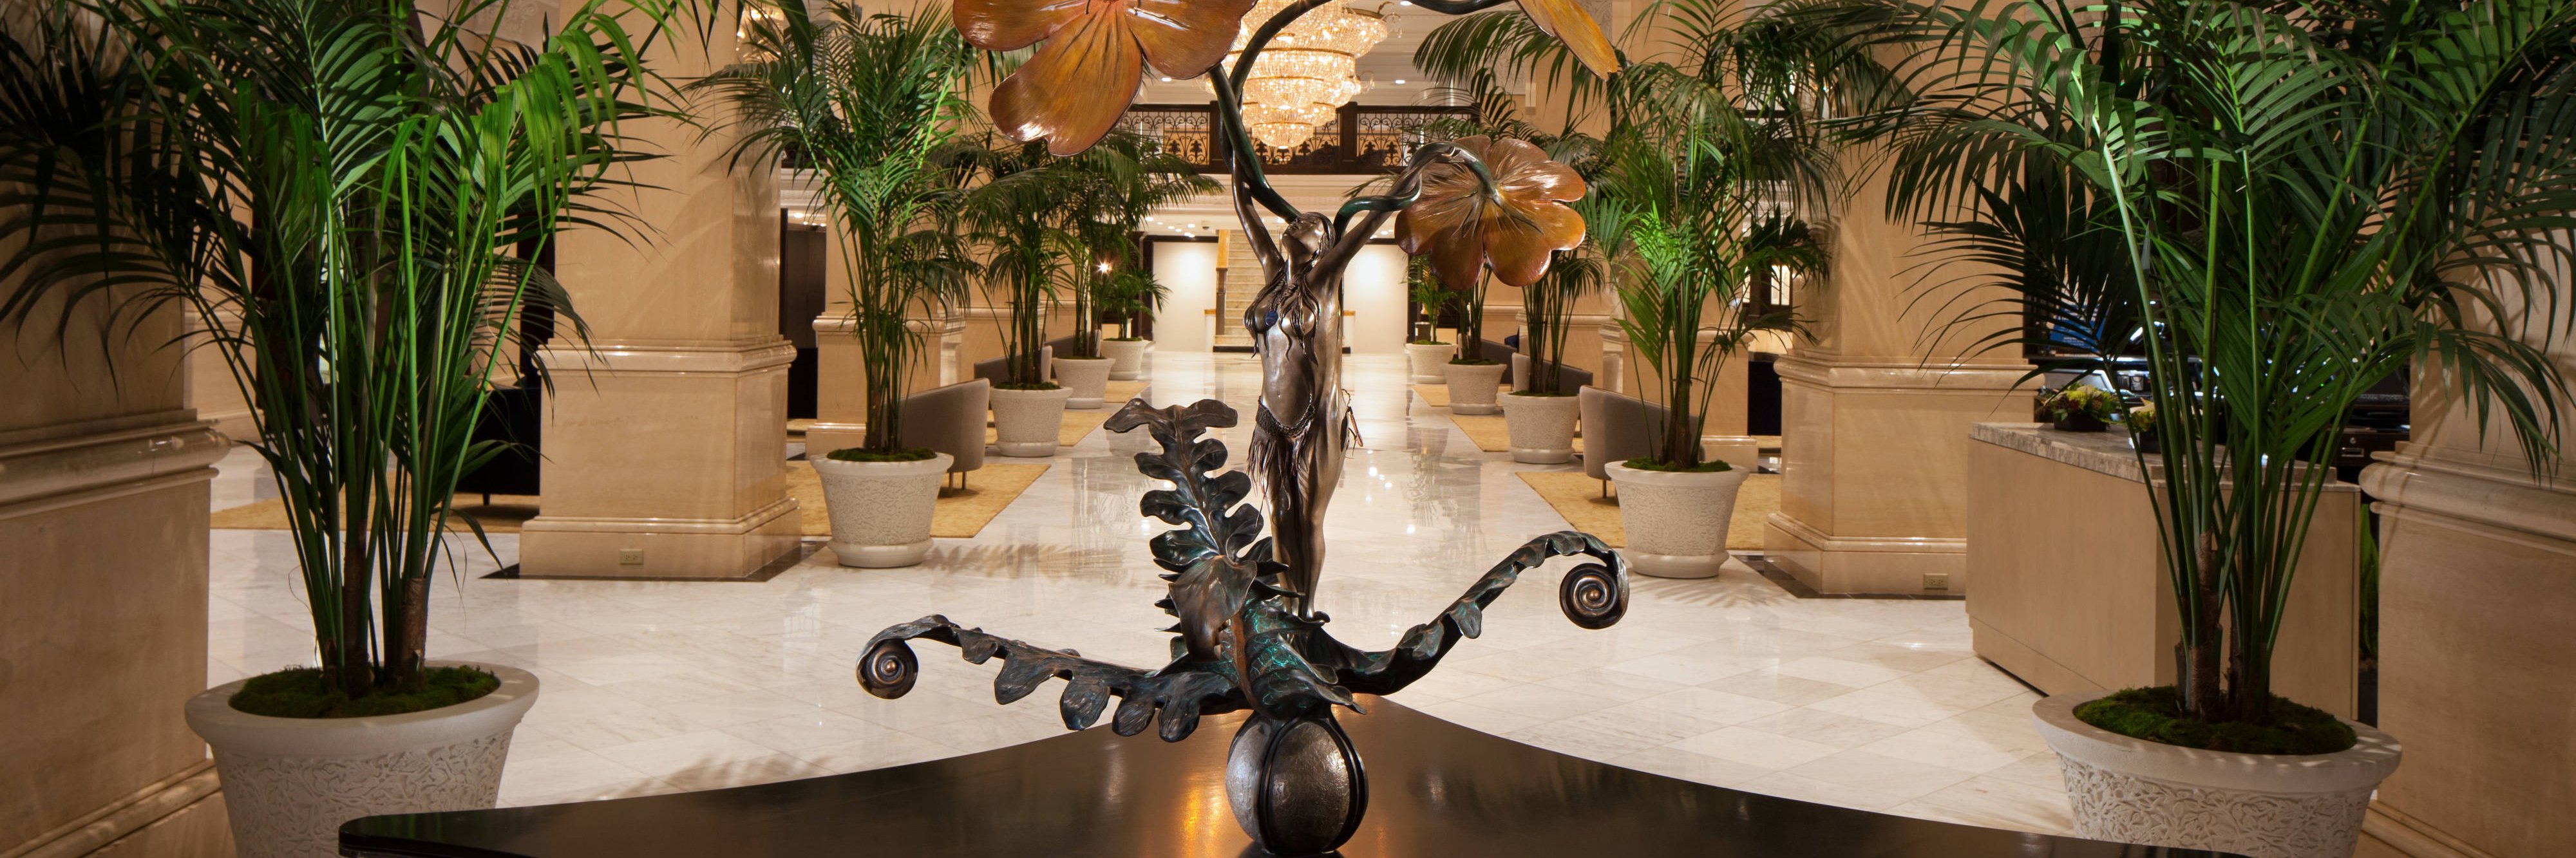 Sculpture in the hotel lobby